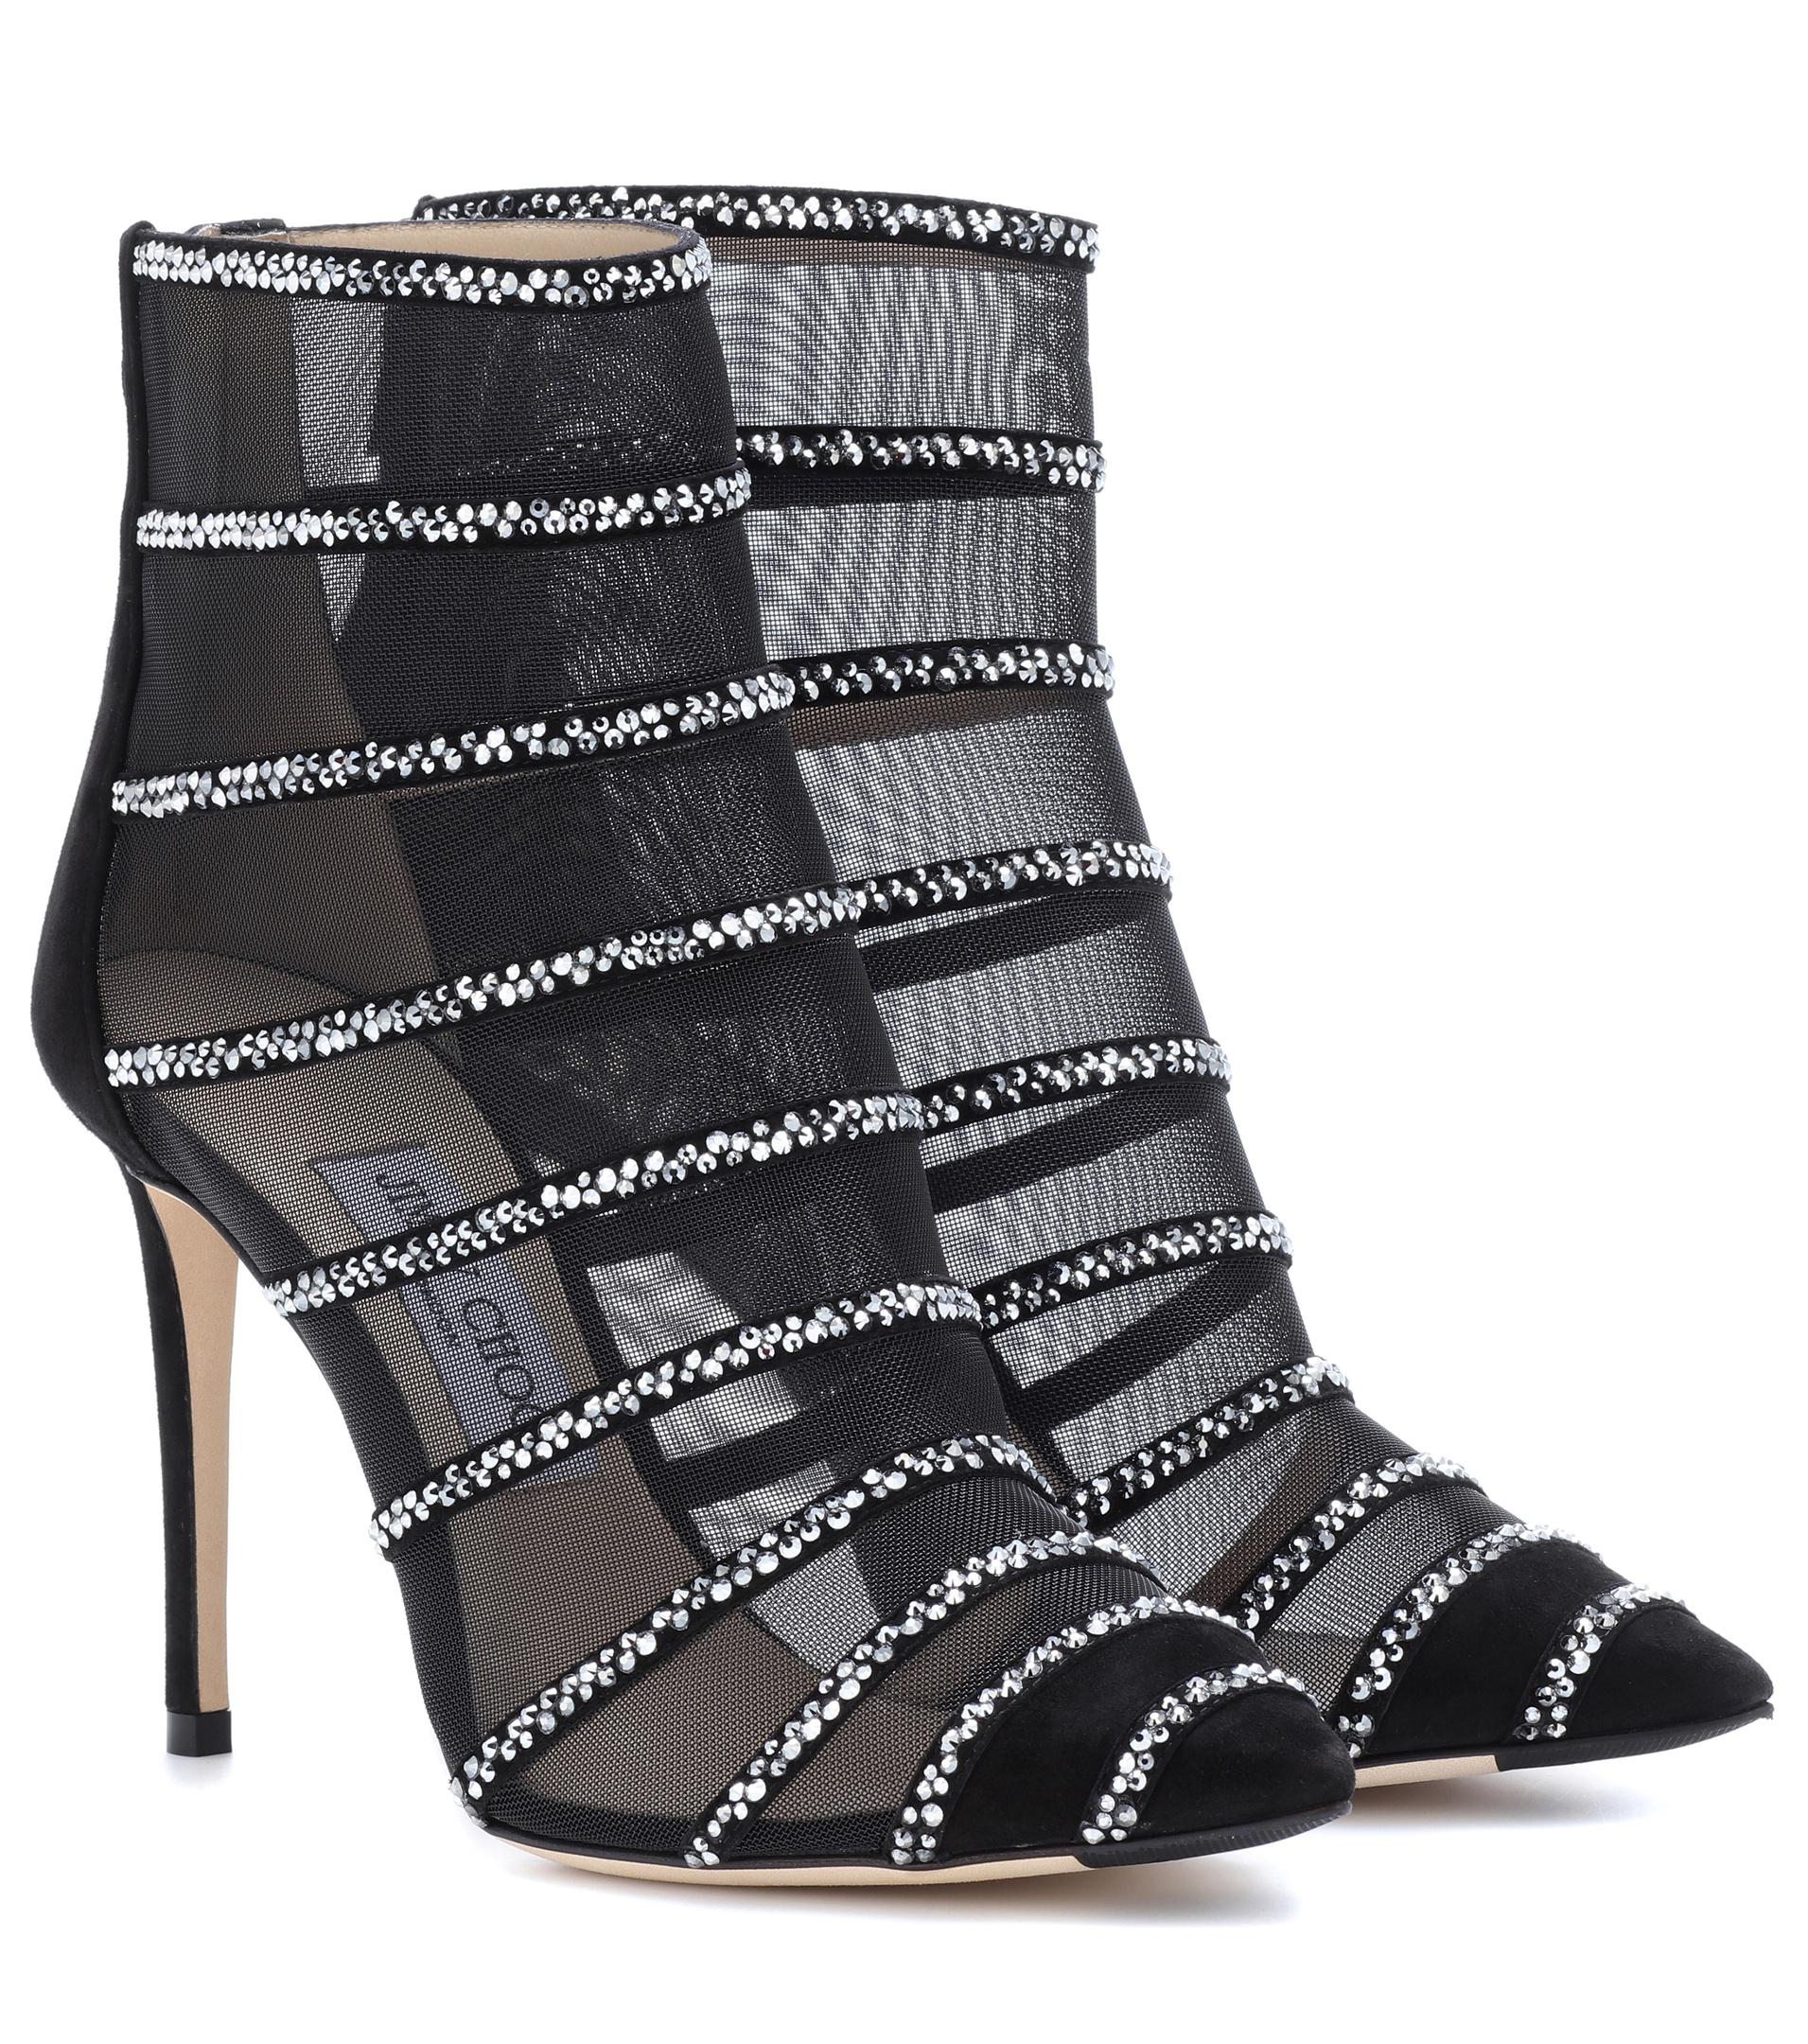 Jimmy Choo Suede Belle 100 Mesh Ankle Boots in Black/Anthracite (Black